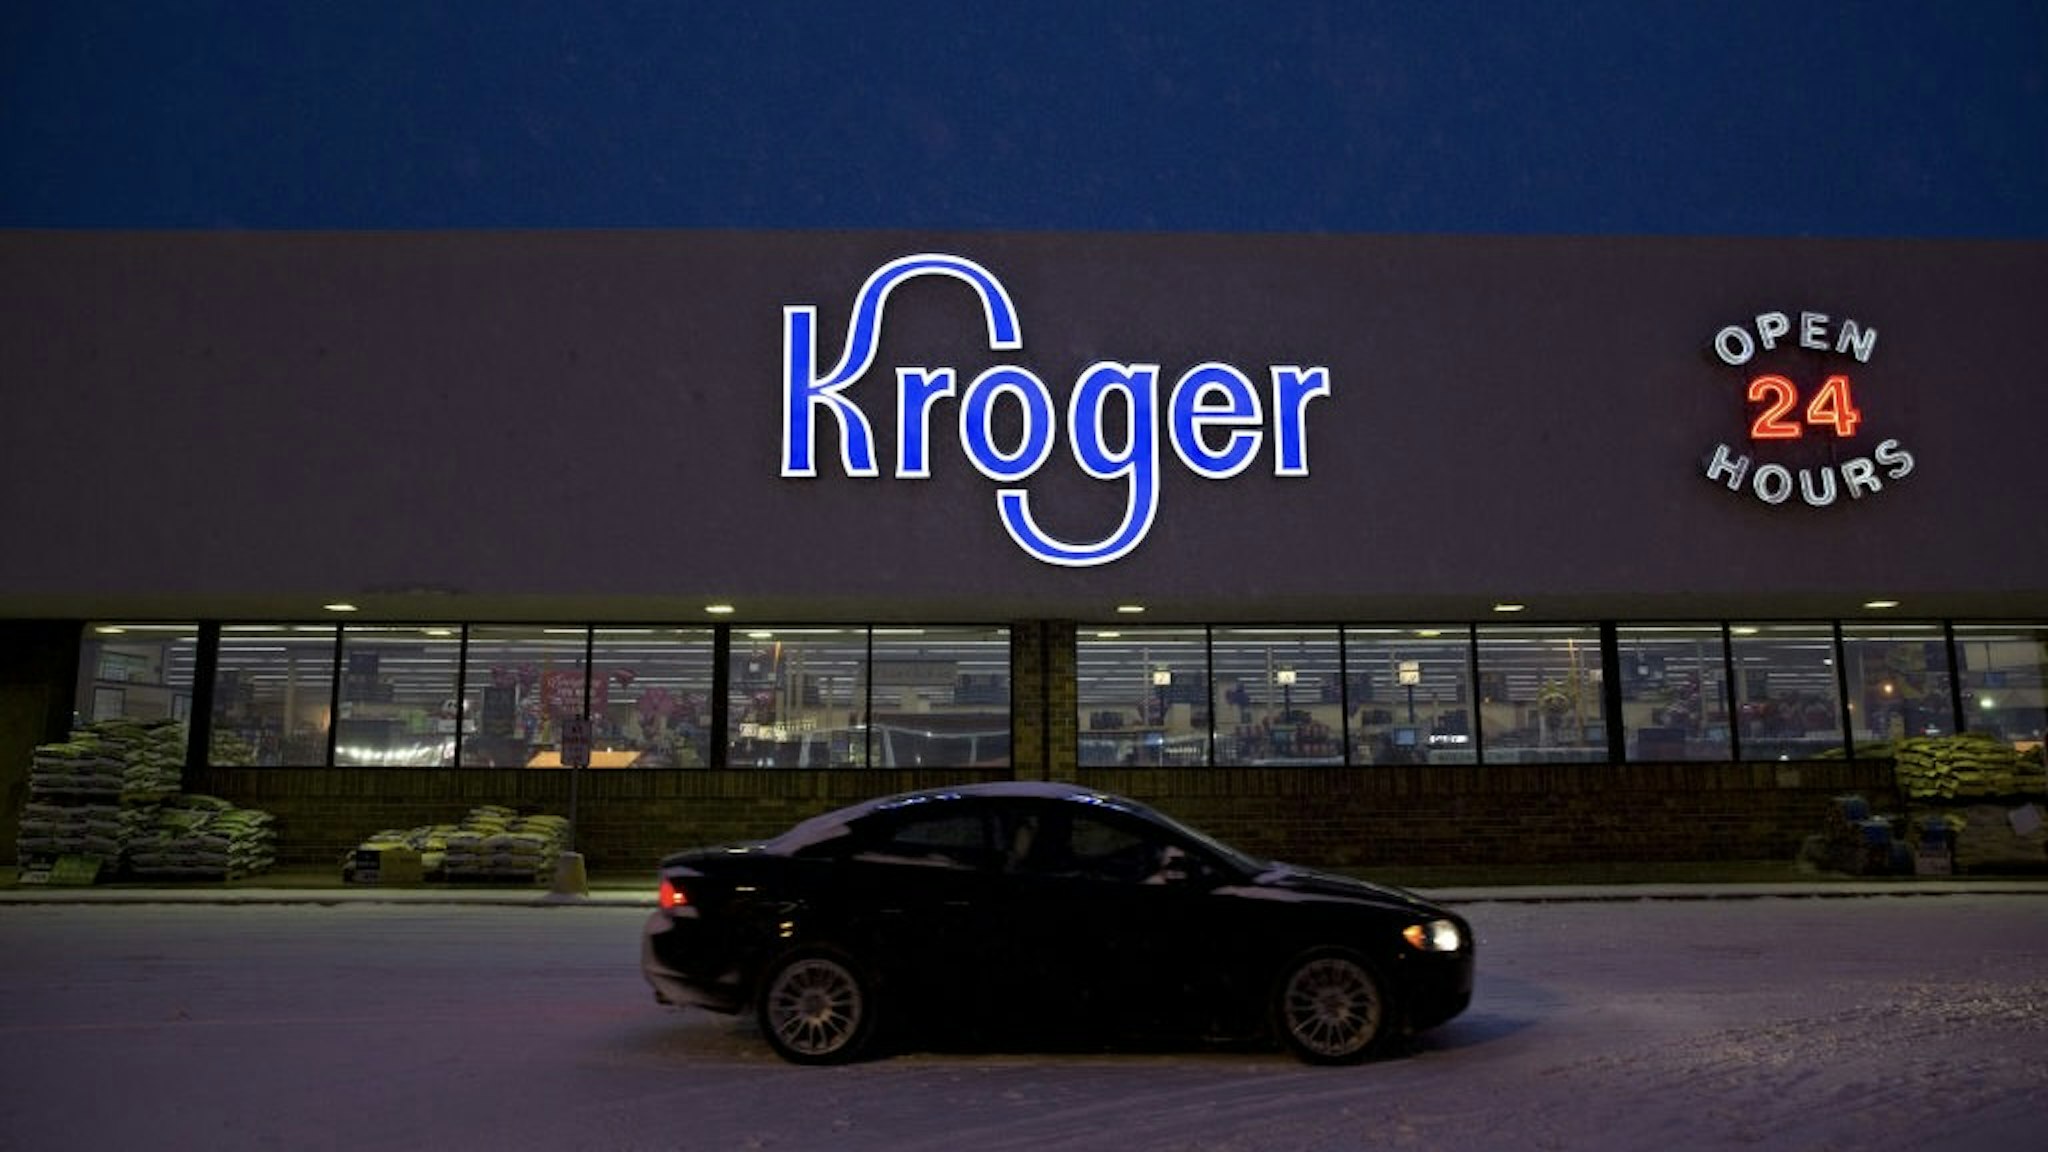 Kroger To Sell Convenience Store Operation For $2.15 Billion A vehicle drives past a Kroger Co. supermarket in Sterling, Illinois, U.S., on Monday, Feb. 5, 2018. Kroger will sell its convenience-store business to EG Group for $2.15 billion, giving a British retailer an entry into the U.S. with stores such as Tom Thumb, Loaf 'N Jug and Kwik Shop. Photographer: Daniel Acker/Bloomberg via Getty Images Bloomberg / Contributor